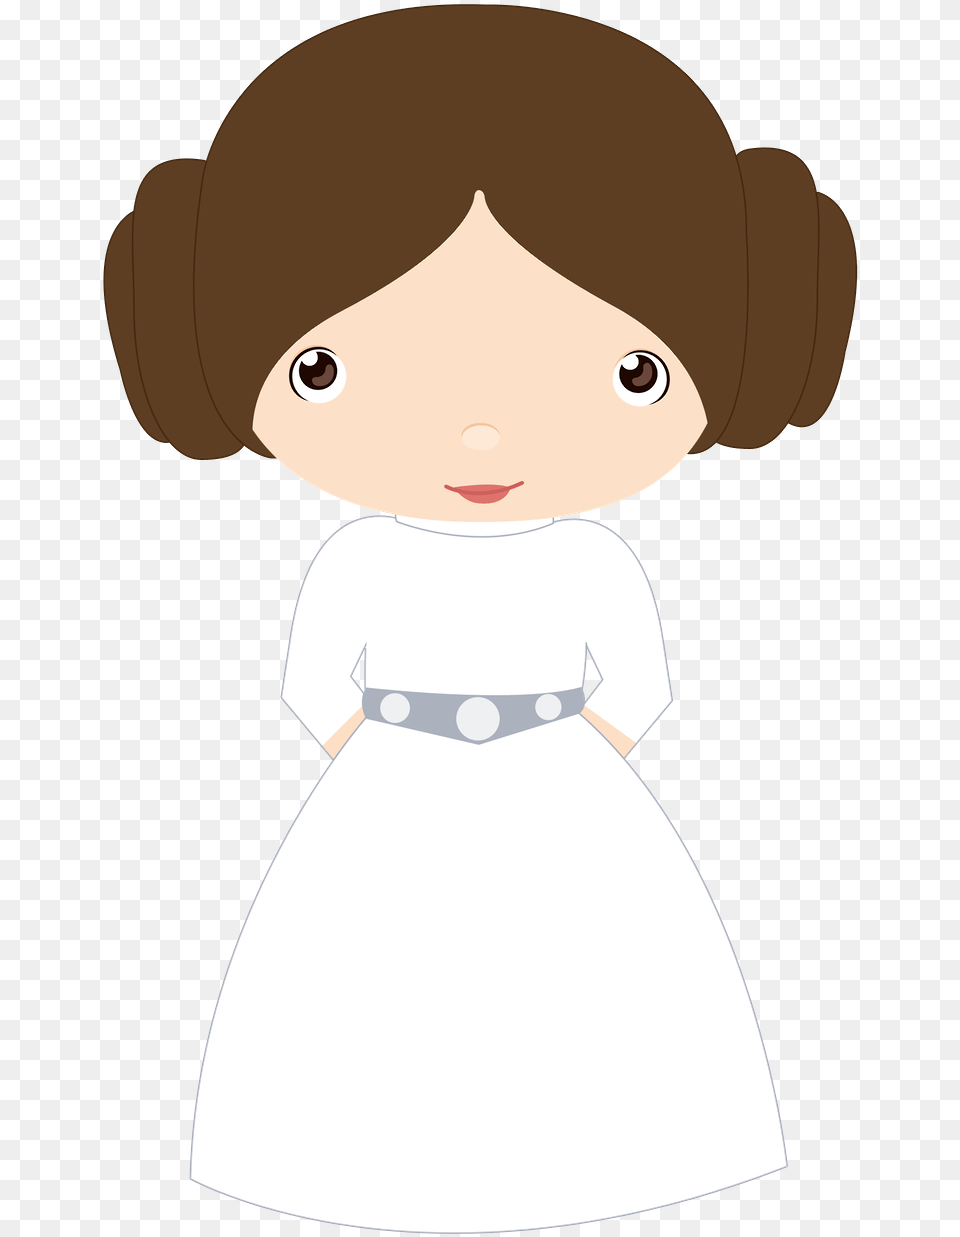 Star Wars Minus Parties Princess Leia Clipart, Doll, Toy, Baby, Person Png